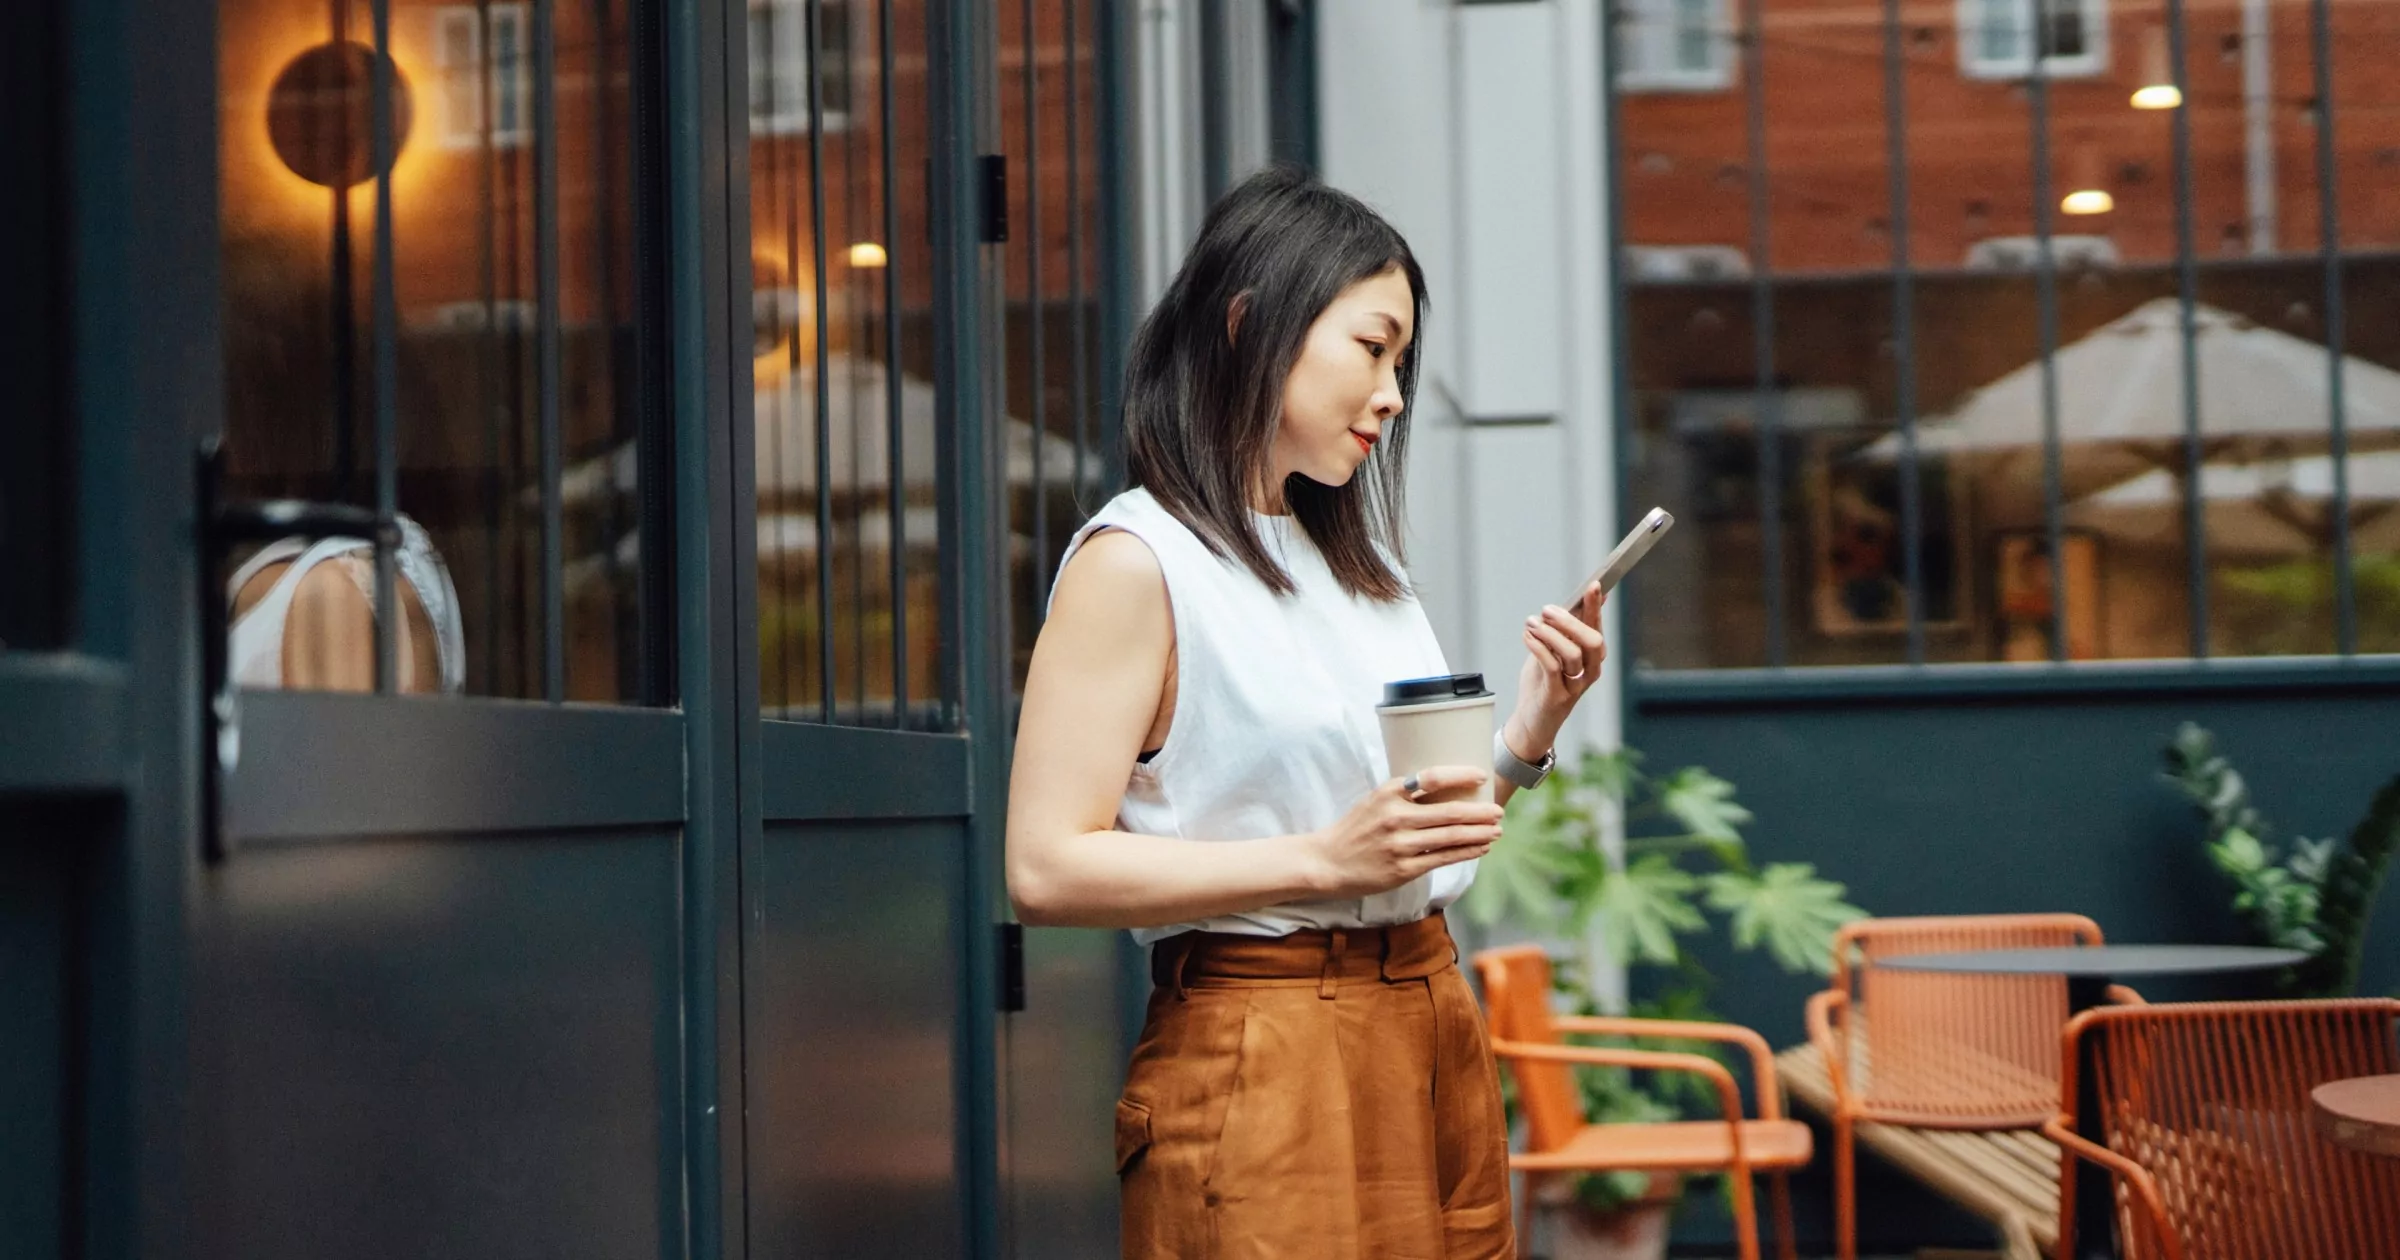 Person standing outside cafe with coffee in one hand and cell phone in the other, looking at cell